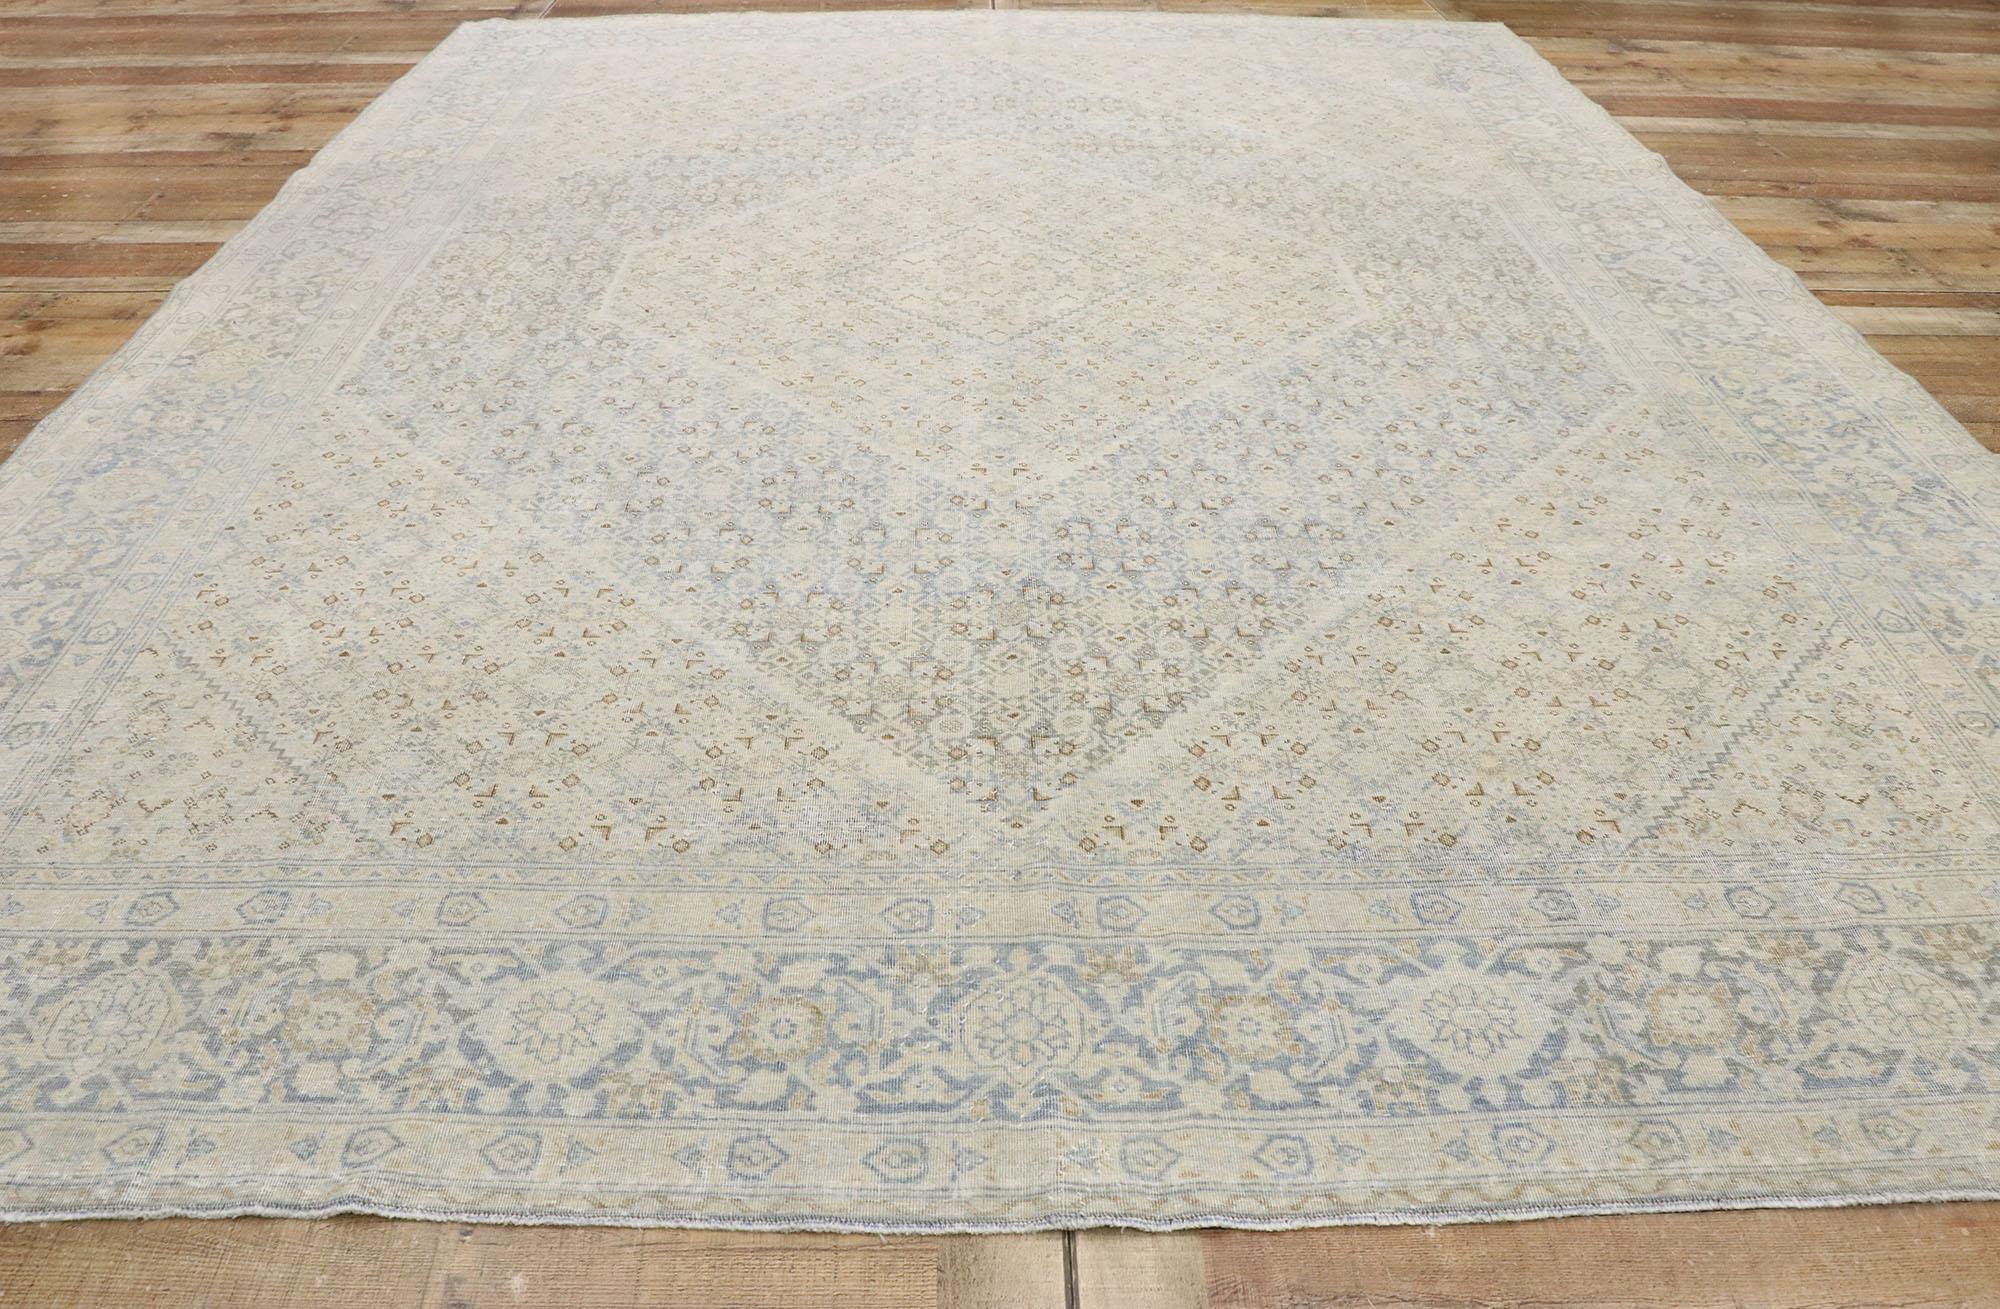 Distressed Vintage Persian Mahi Tabriz Rug with English Country Cottage Style For Sale 2